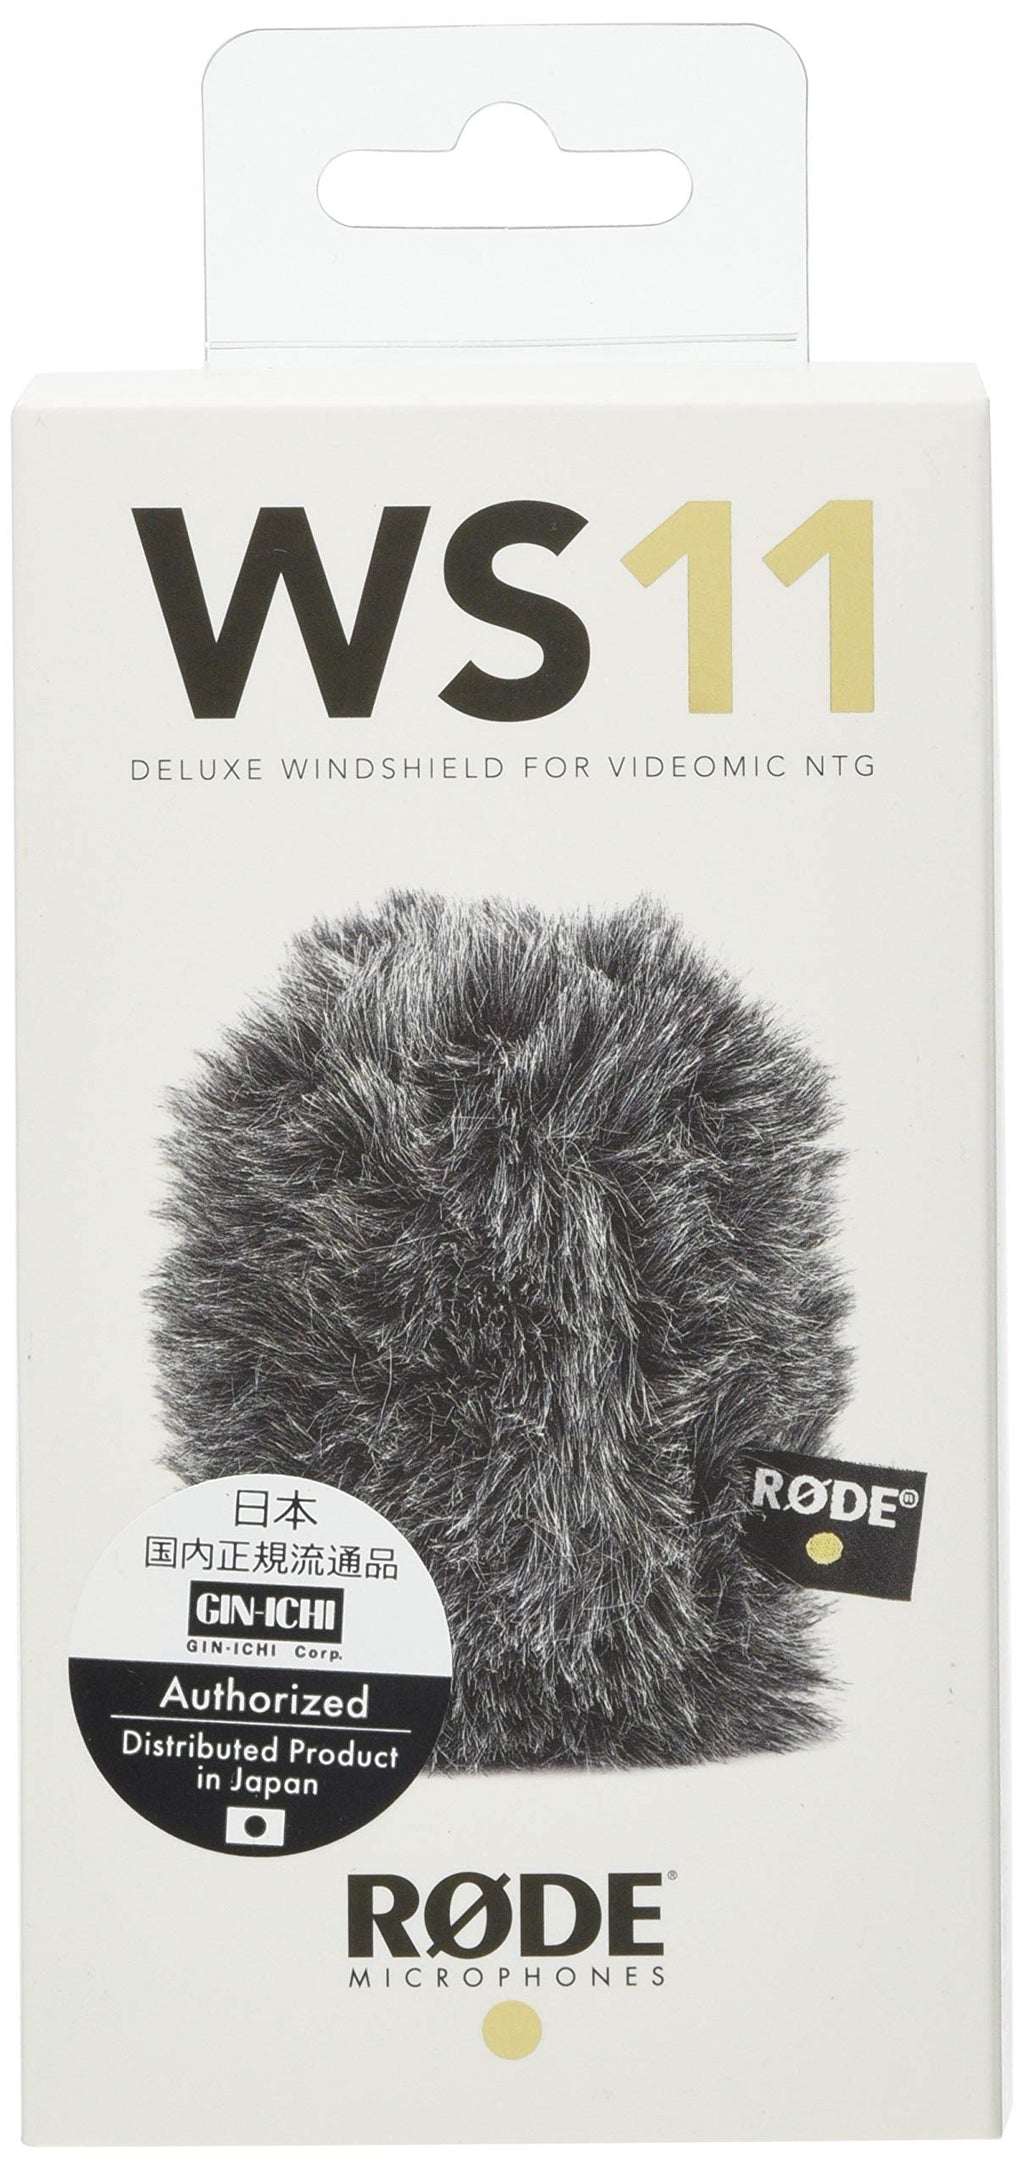 Rode Microphones WS11 Professional Grade Windshield for VideoMic NTG Mic